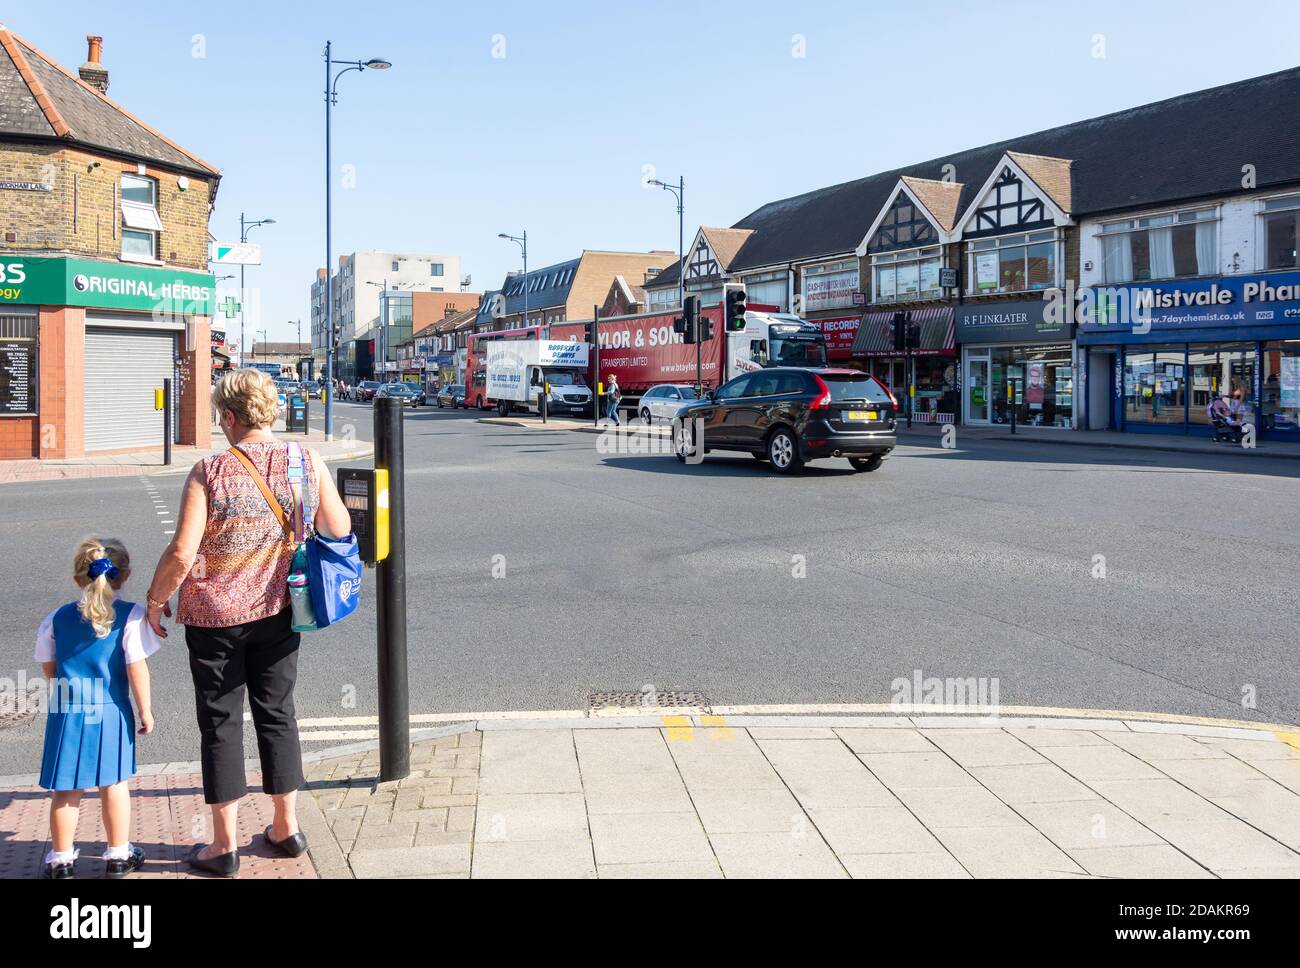 Welling High Street, Welling, London Borough of Bexley, Greater London, England, Regno Unito Foto Stock